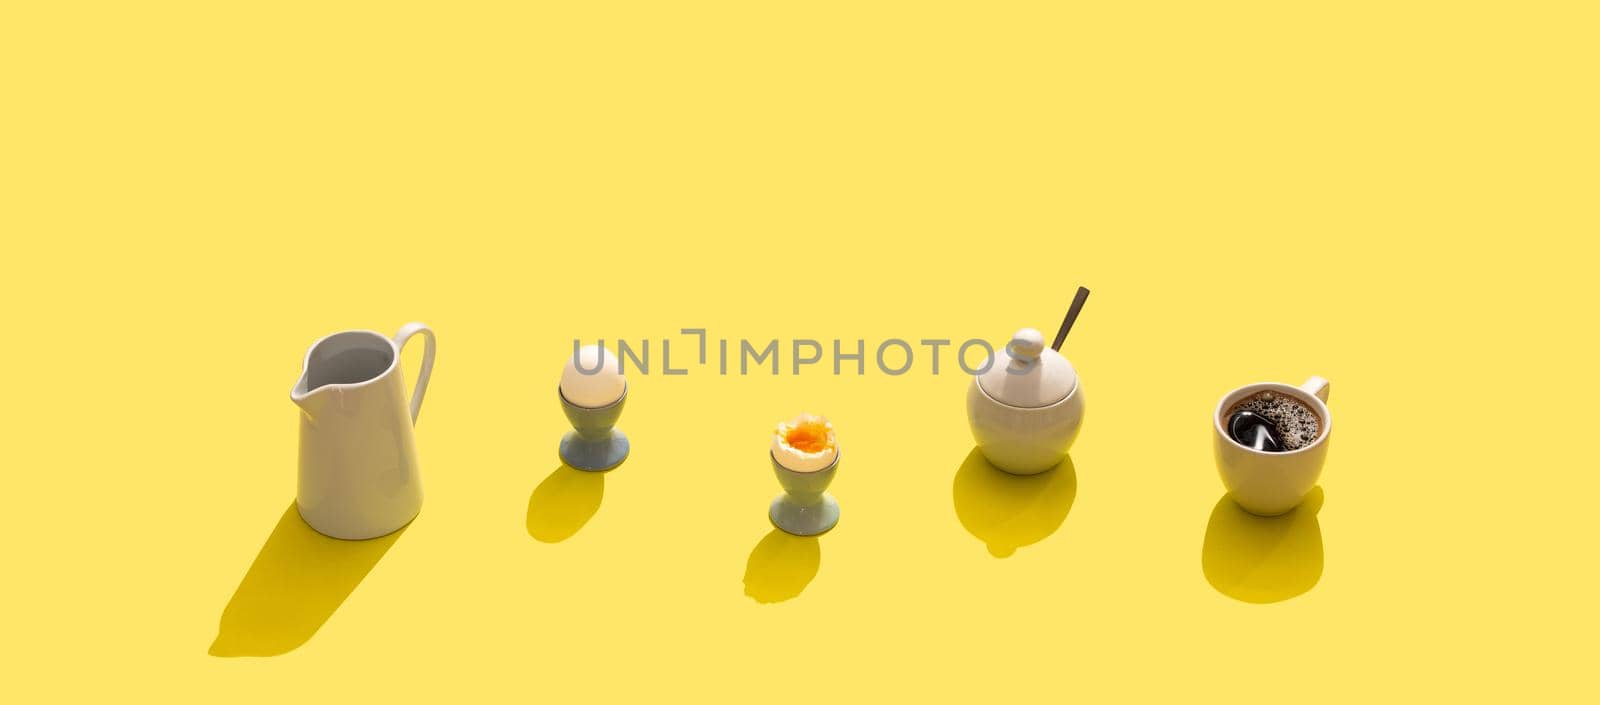 Breakfast set with soft boiled eggs, black coffee in white cup, milk jug, sugar bowl with hard light, yellow bright background. Hard shadows breakfast, simple minimal concept. Copy space, long banner